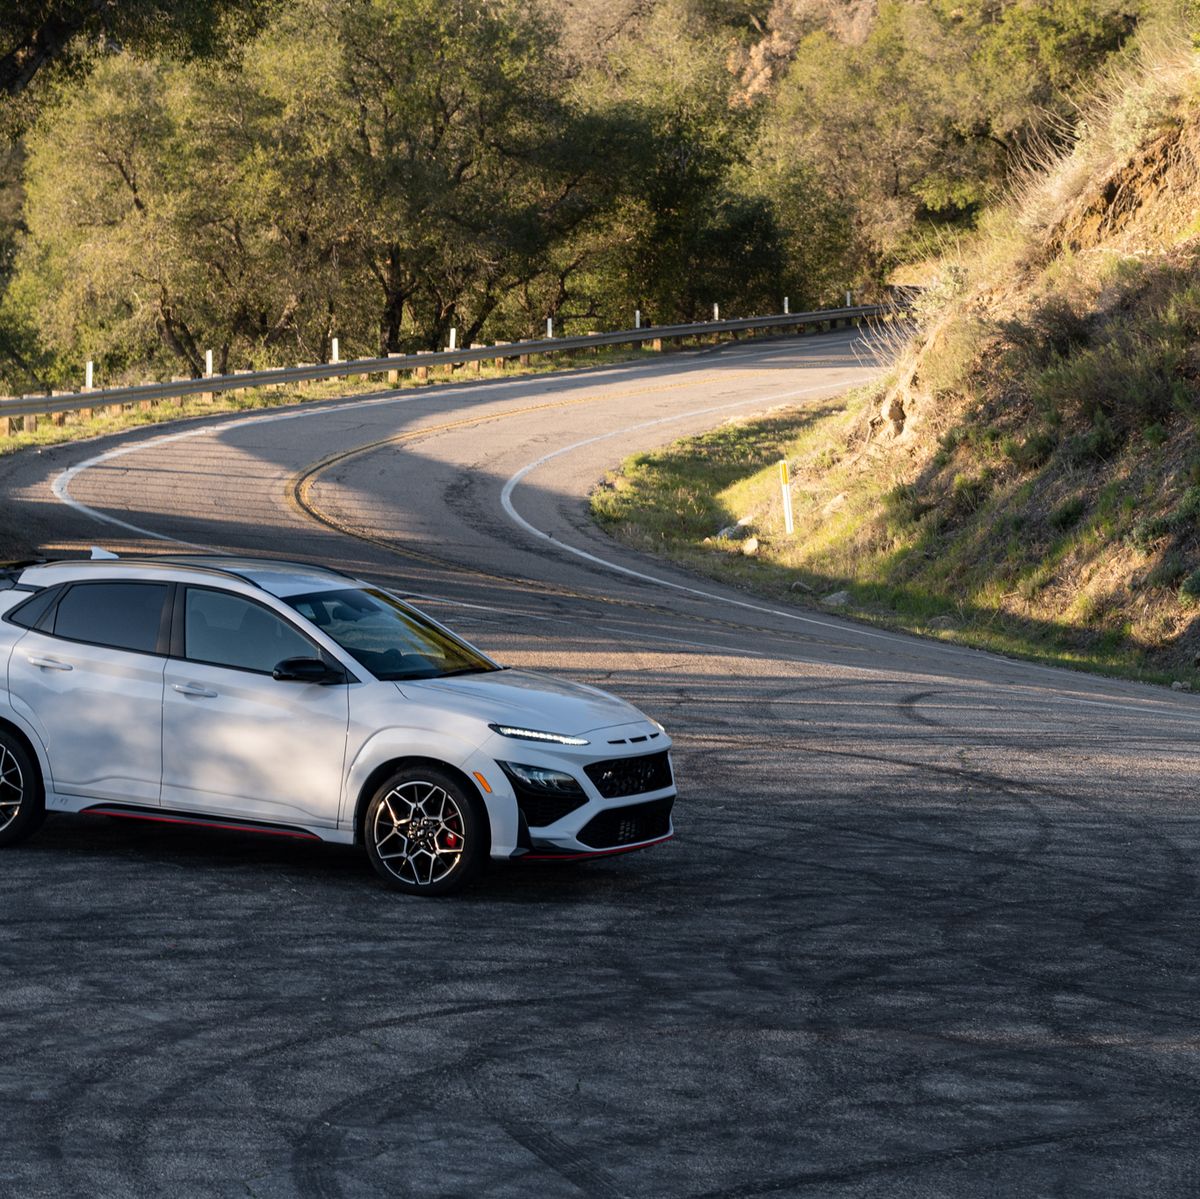 Hyundai i30 N Hot Hatch May Not Survive For A Second-Generation But The  Elantra N Should